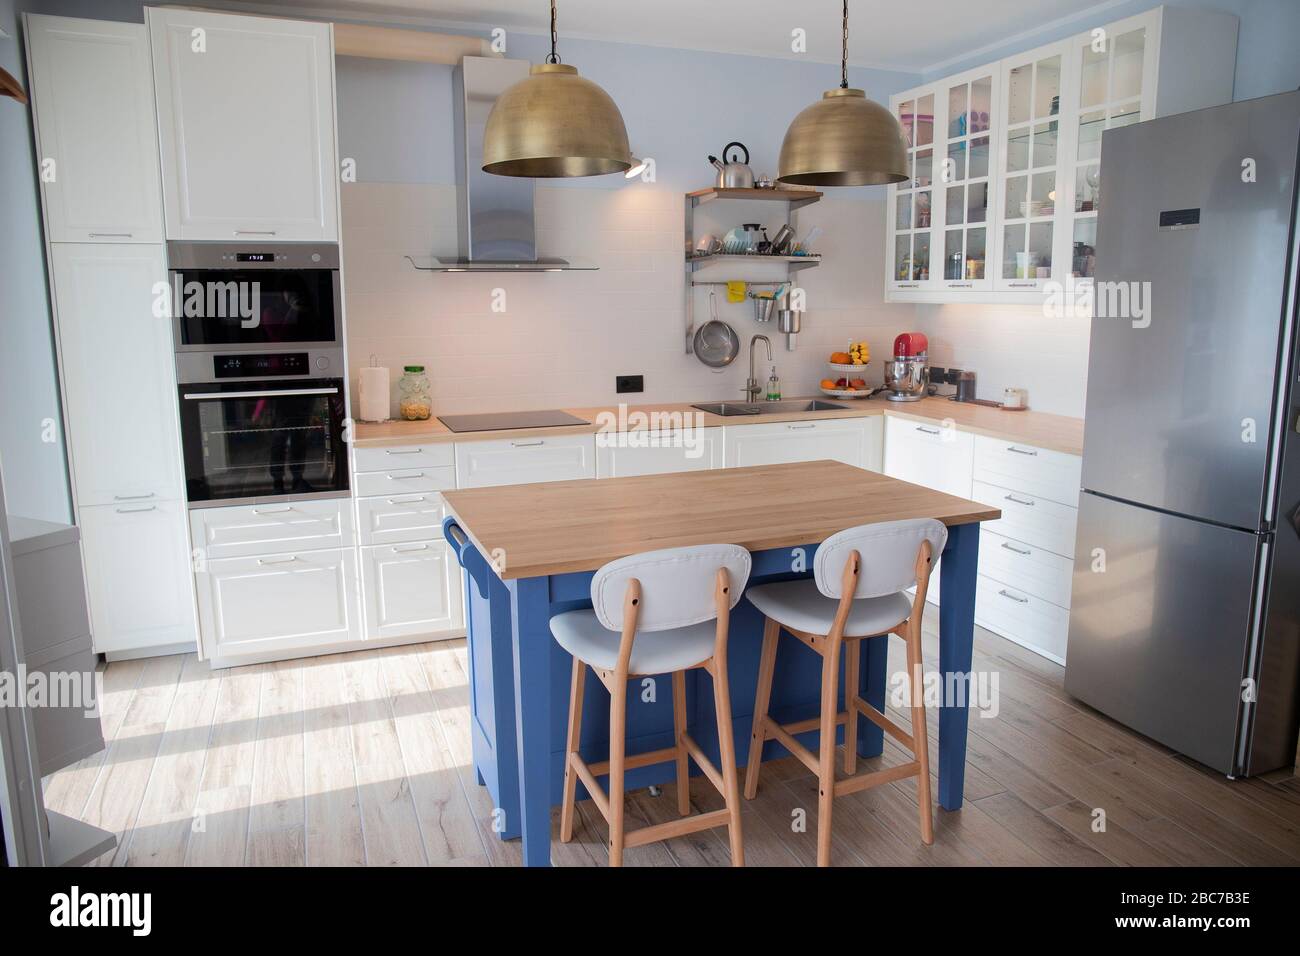 White, bright kitchen with blue island and double brass pendant lights. Stock Photo